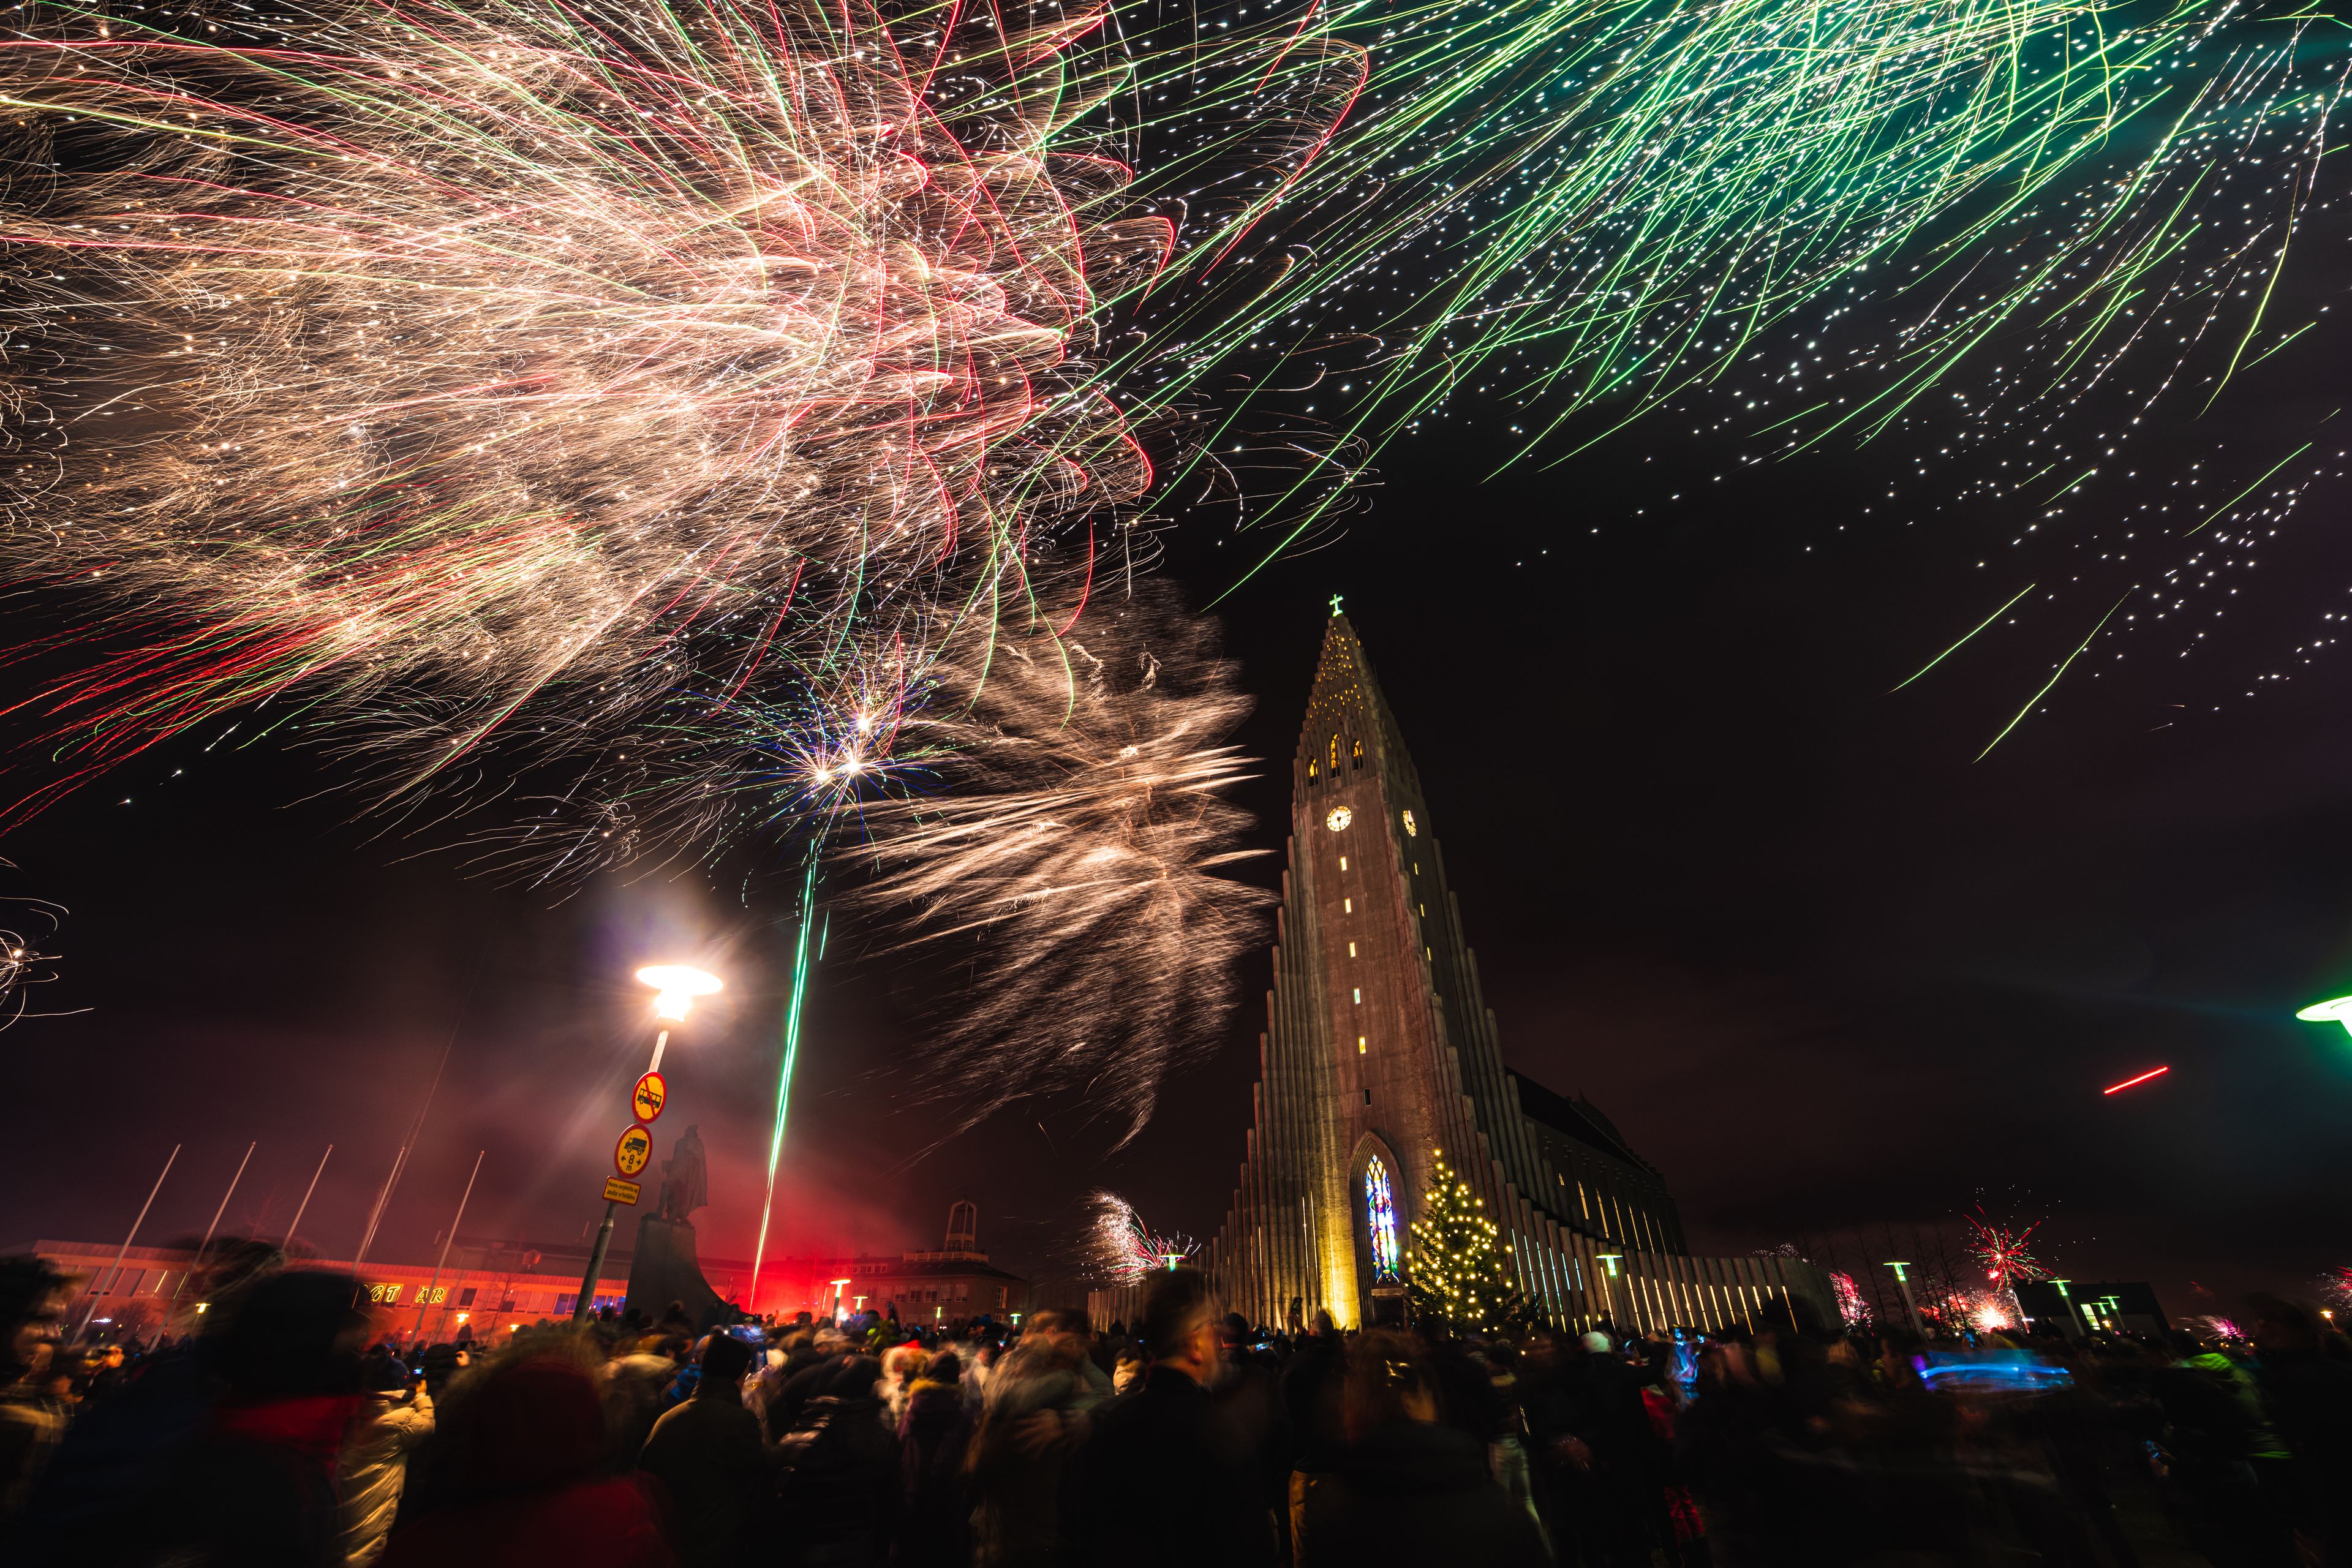 People gathering in Reykjavik to celebrate New Year's Eve with fireworks and music